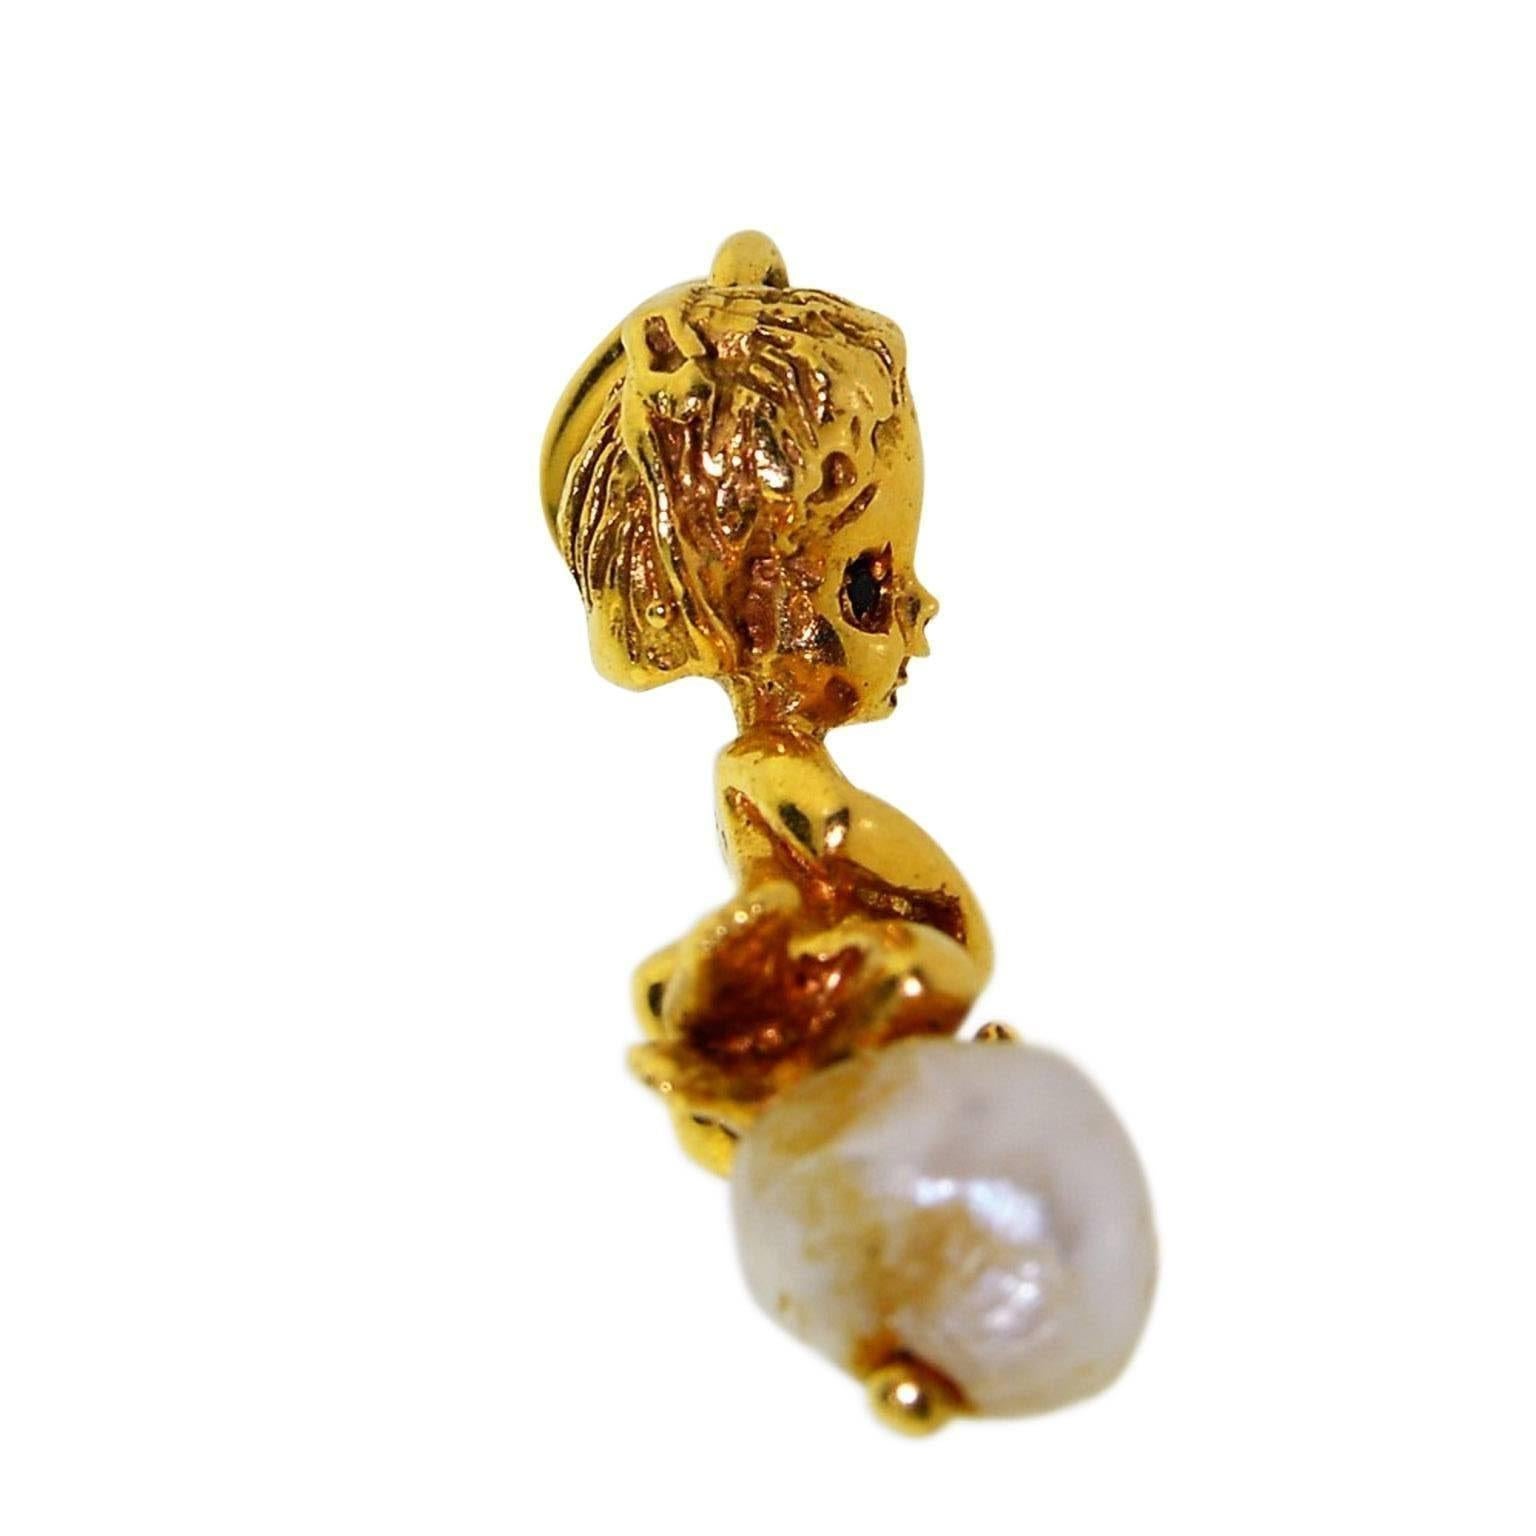 This charming little drop with a natural pearl is done in 14kt solid gold. The eyes are set with sapphires and the little Cherub is holding a broom.
I guess he is cleaning in heaven, or maybe he is practicing for Olympic Curling with a broom.
Bill